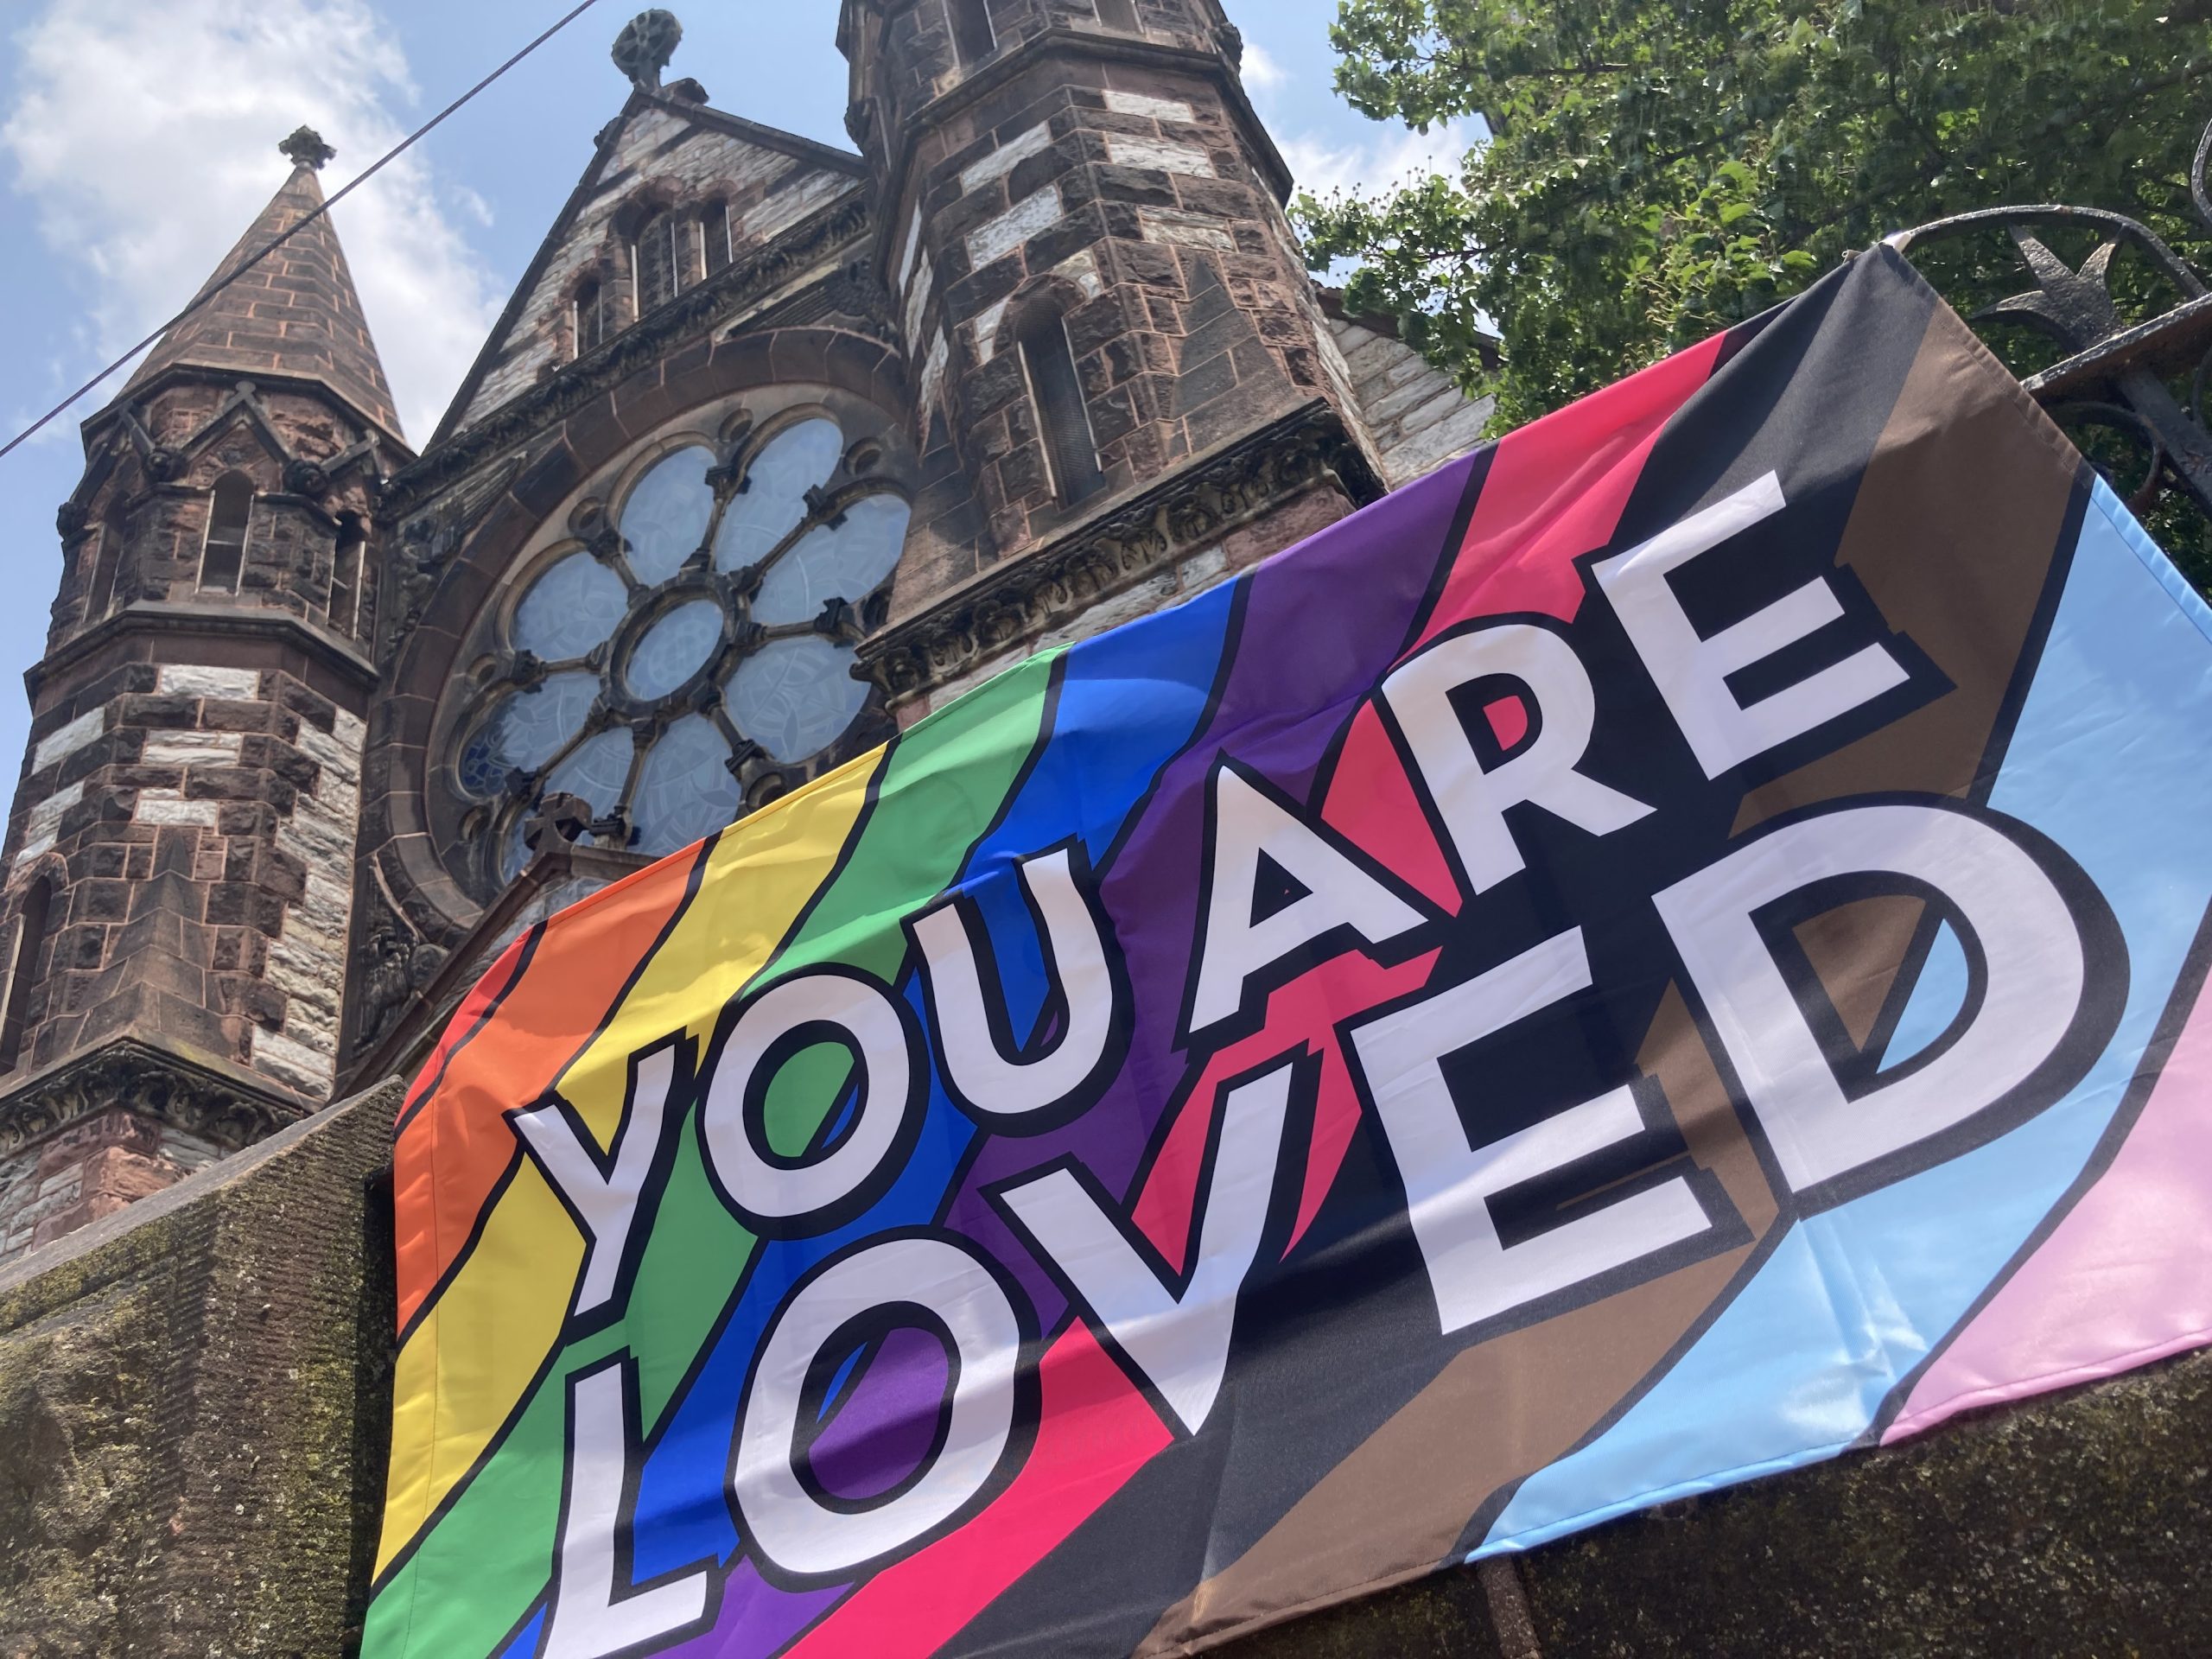 exterior of a stone church with a rainbow banner that says "You Are Loved"